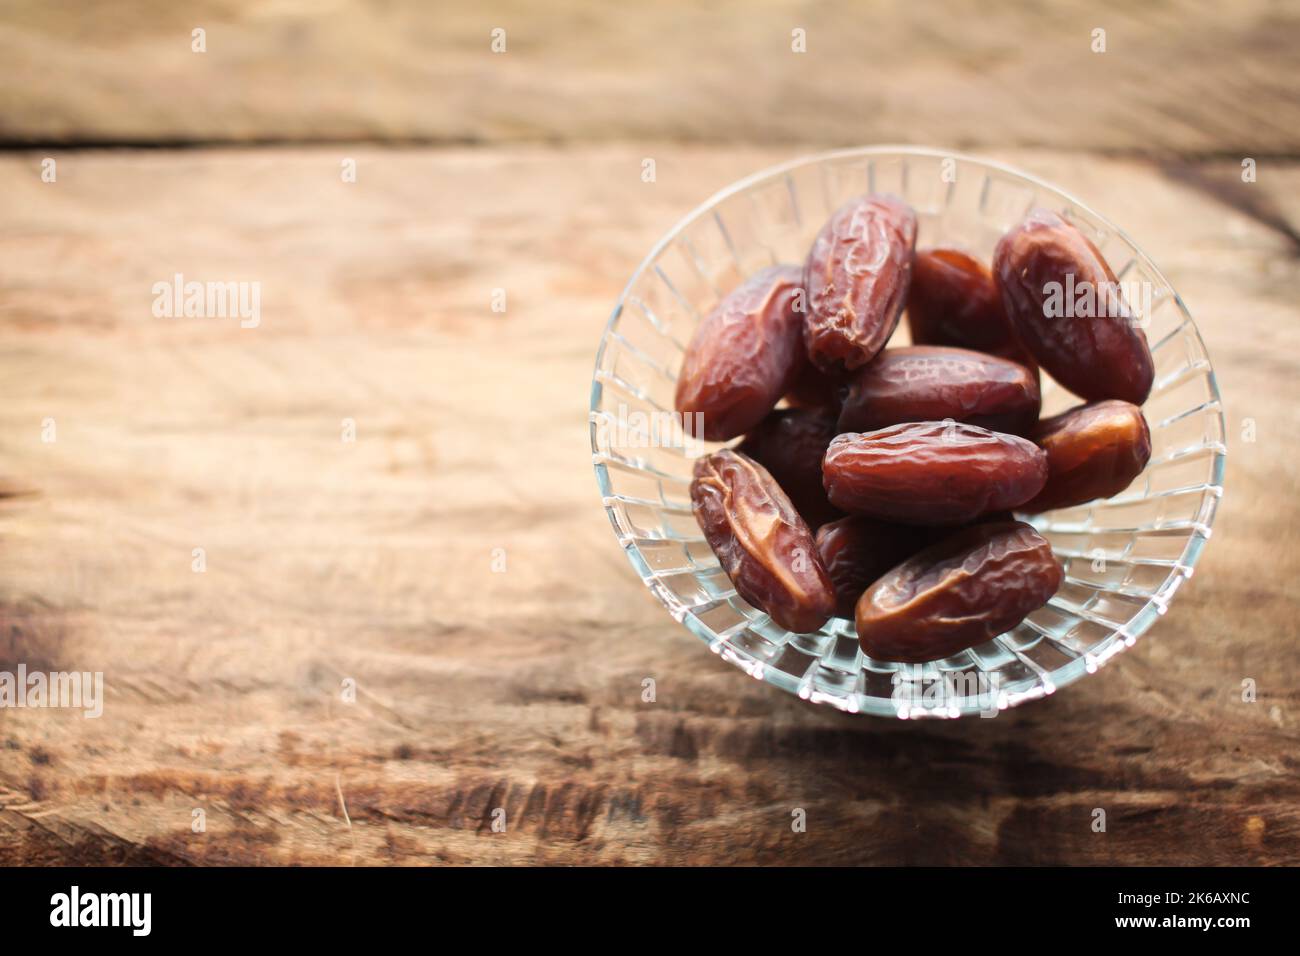 Lakhs is a type of dates. It is characterized by preserving its good flavor after a long period of storage. Stock Photo